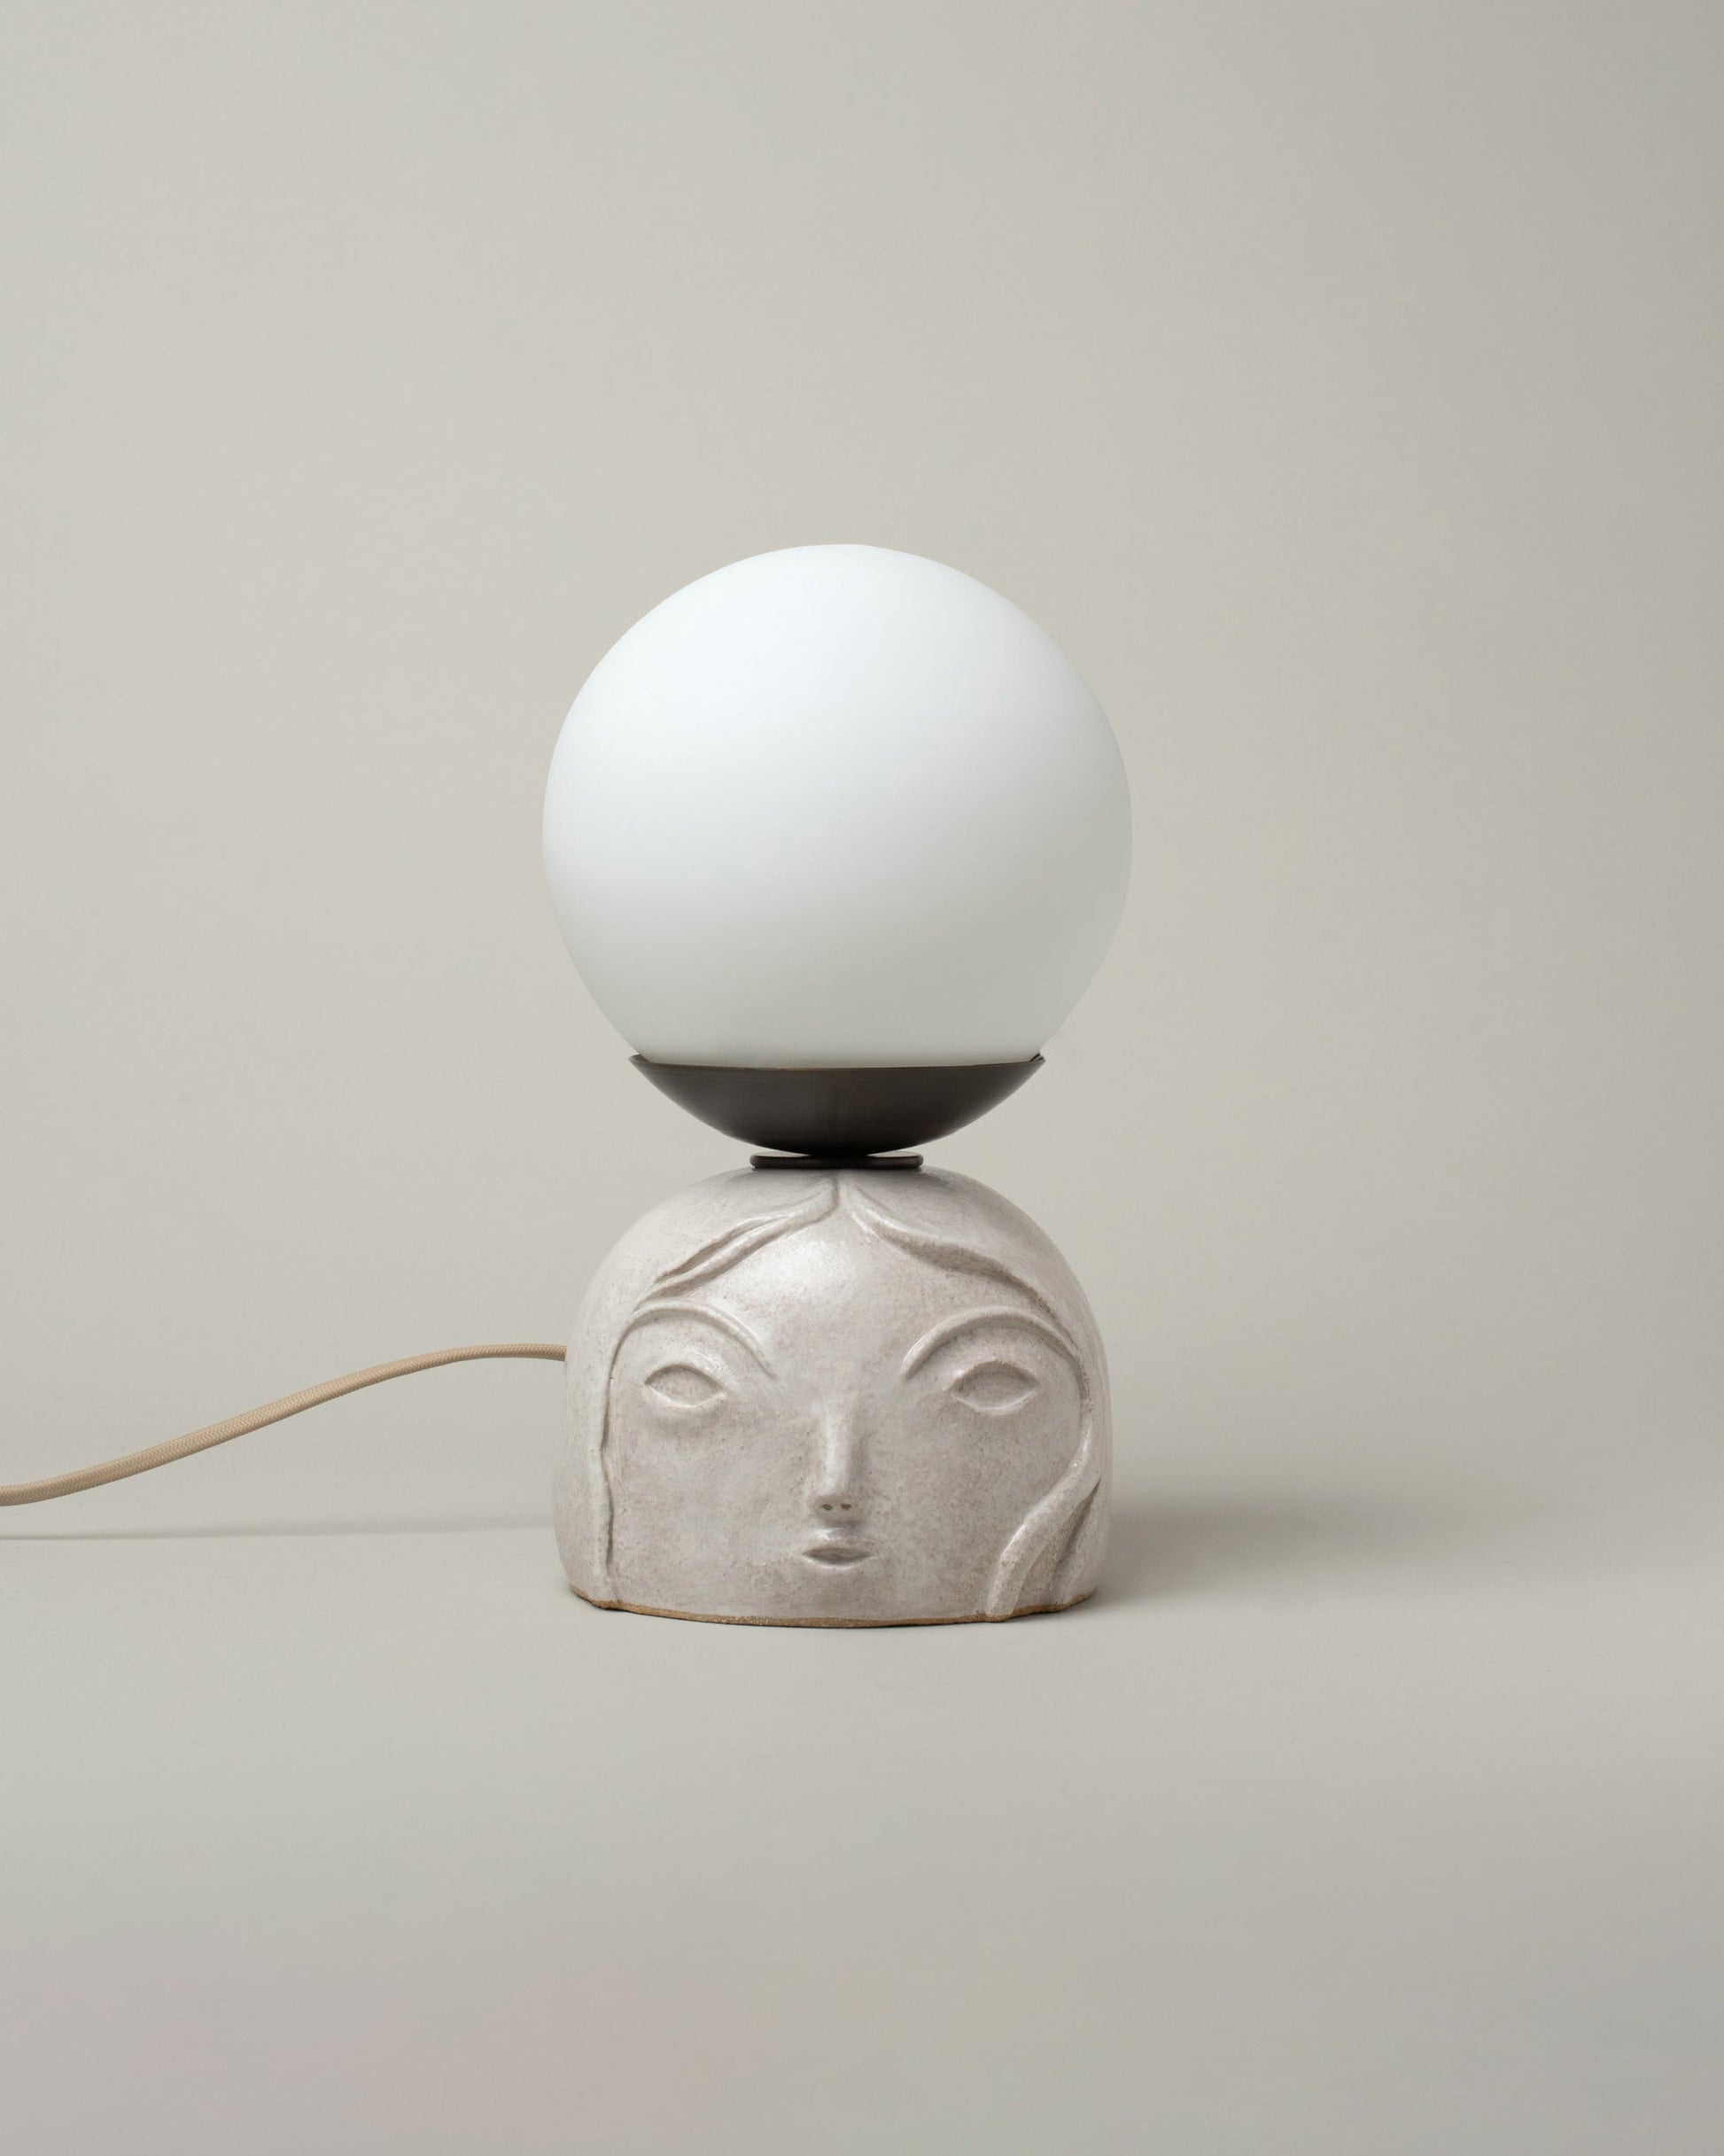 Rami Kim Small / White Floating Penelope Table Lamp on light color background.